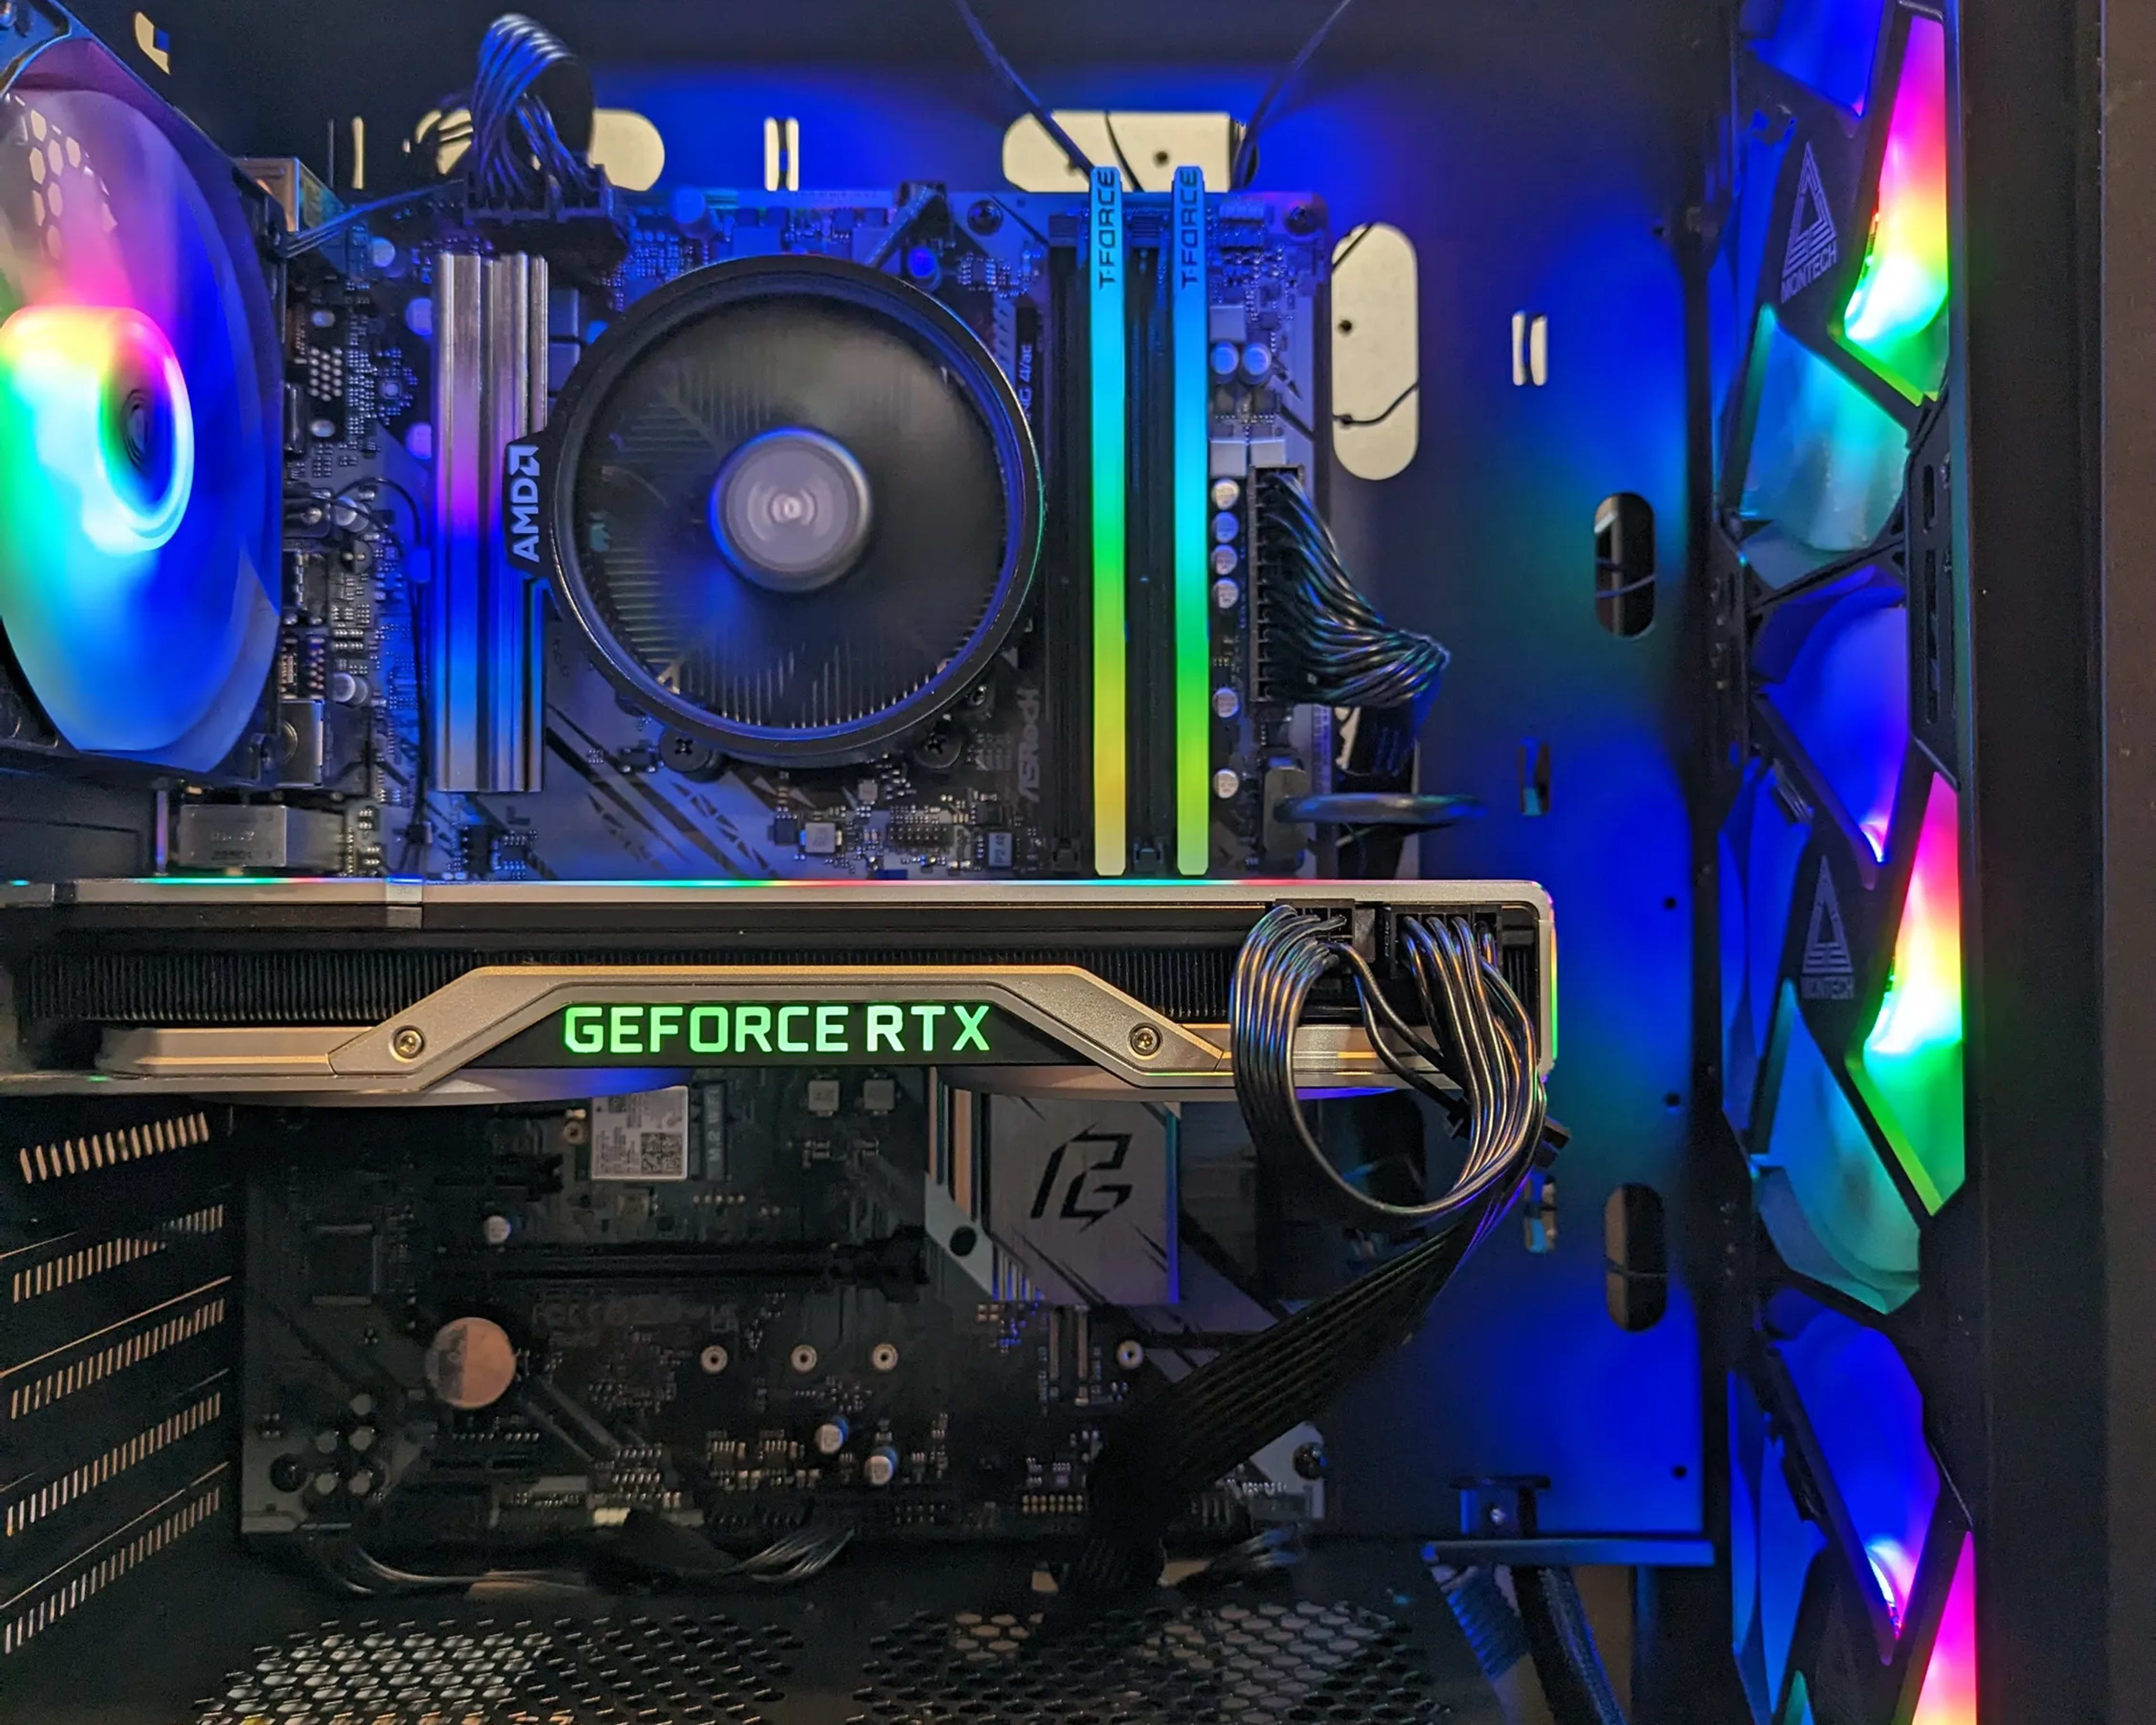 1440p Gaming pc| AMD 5600G |RTX 2070 Super Founders| 16GB DDR4 3200MHz|